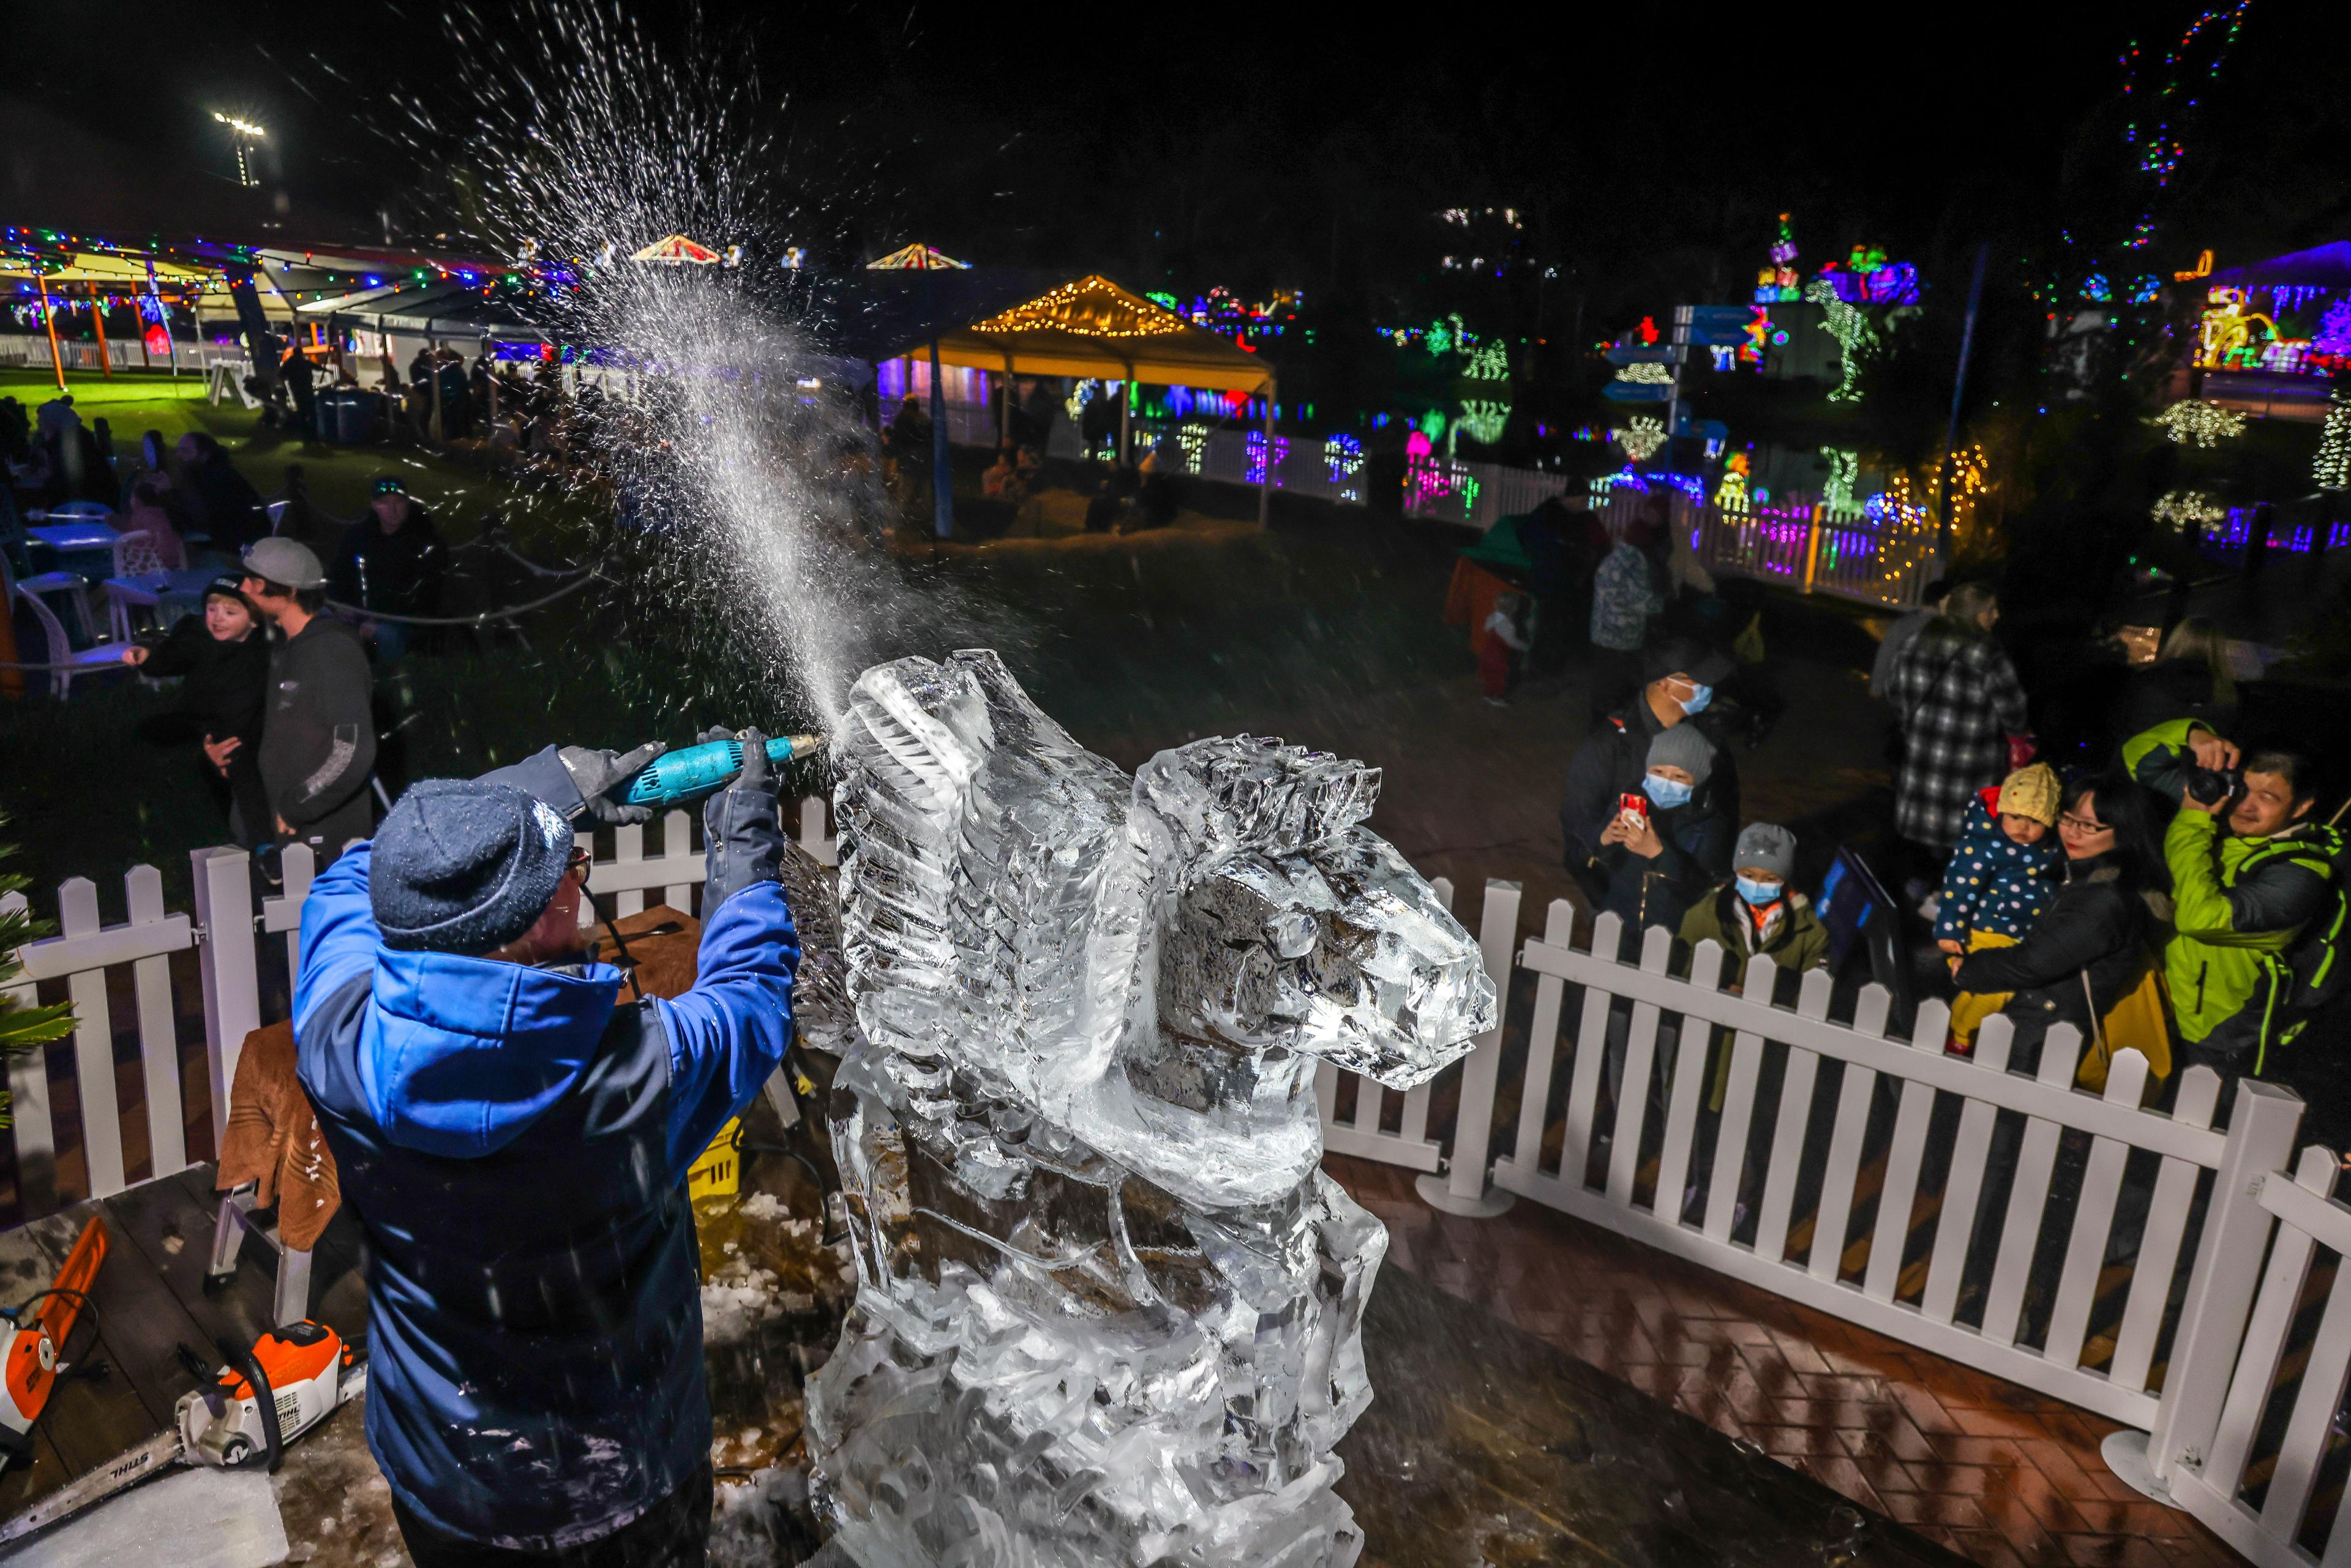 See spectacular Ice Carving displays background